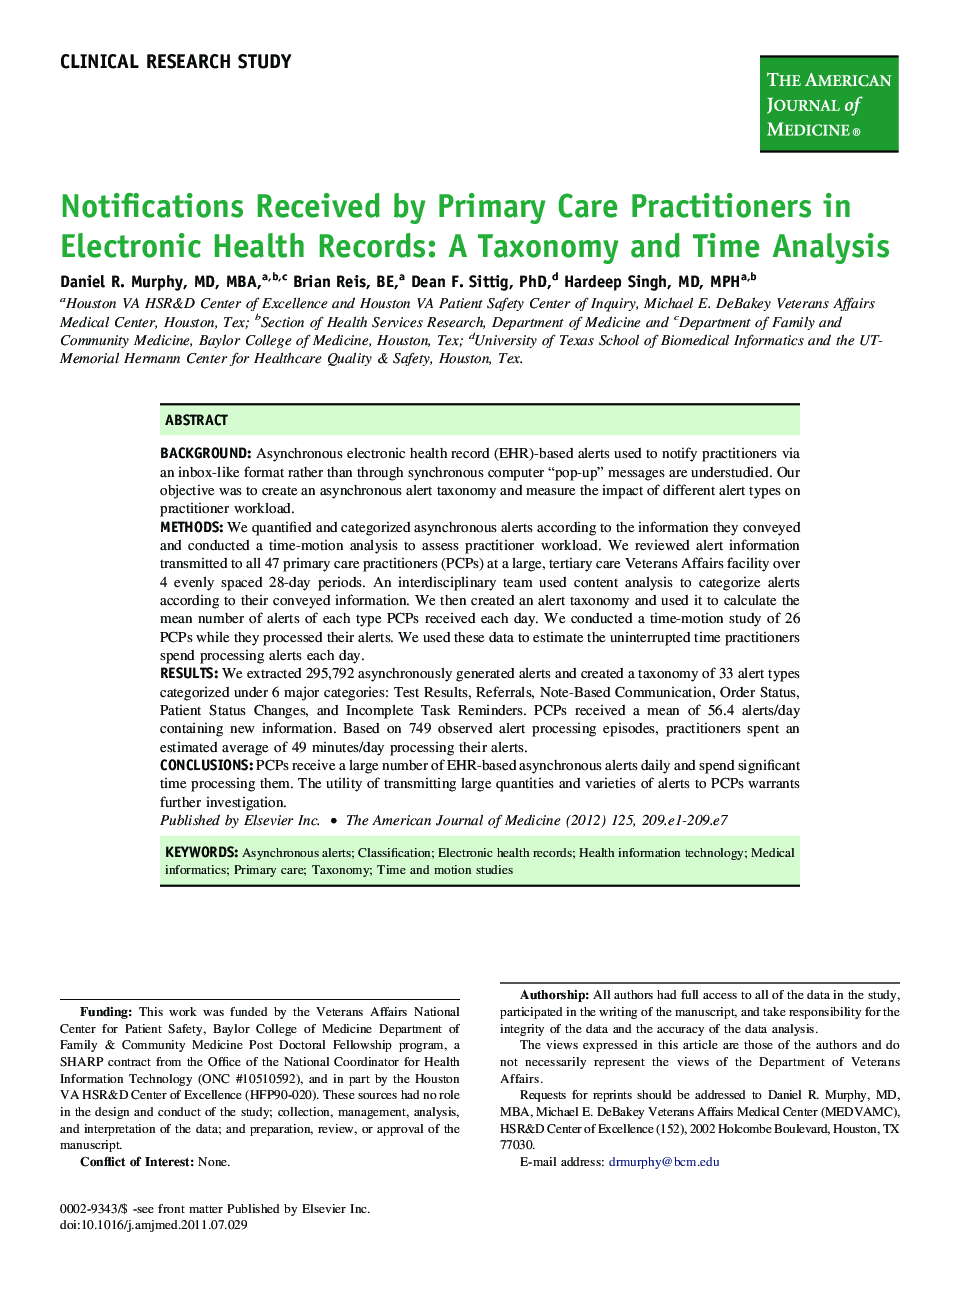 Notifications Received by Primary Care Practitioners in Electronic Health Records: A Taxonomy and Time Analysis